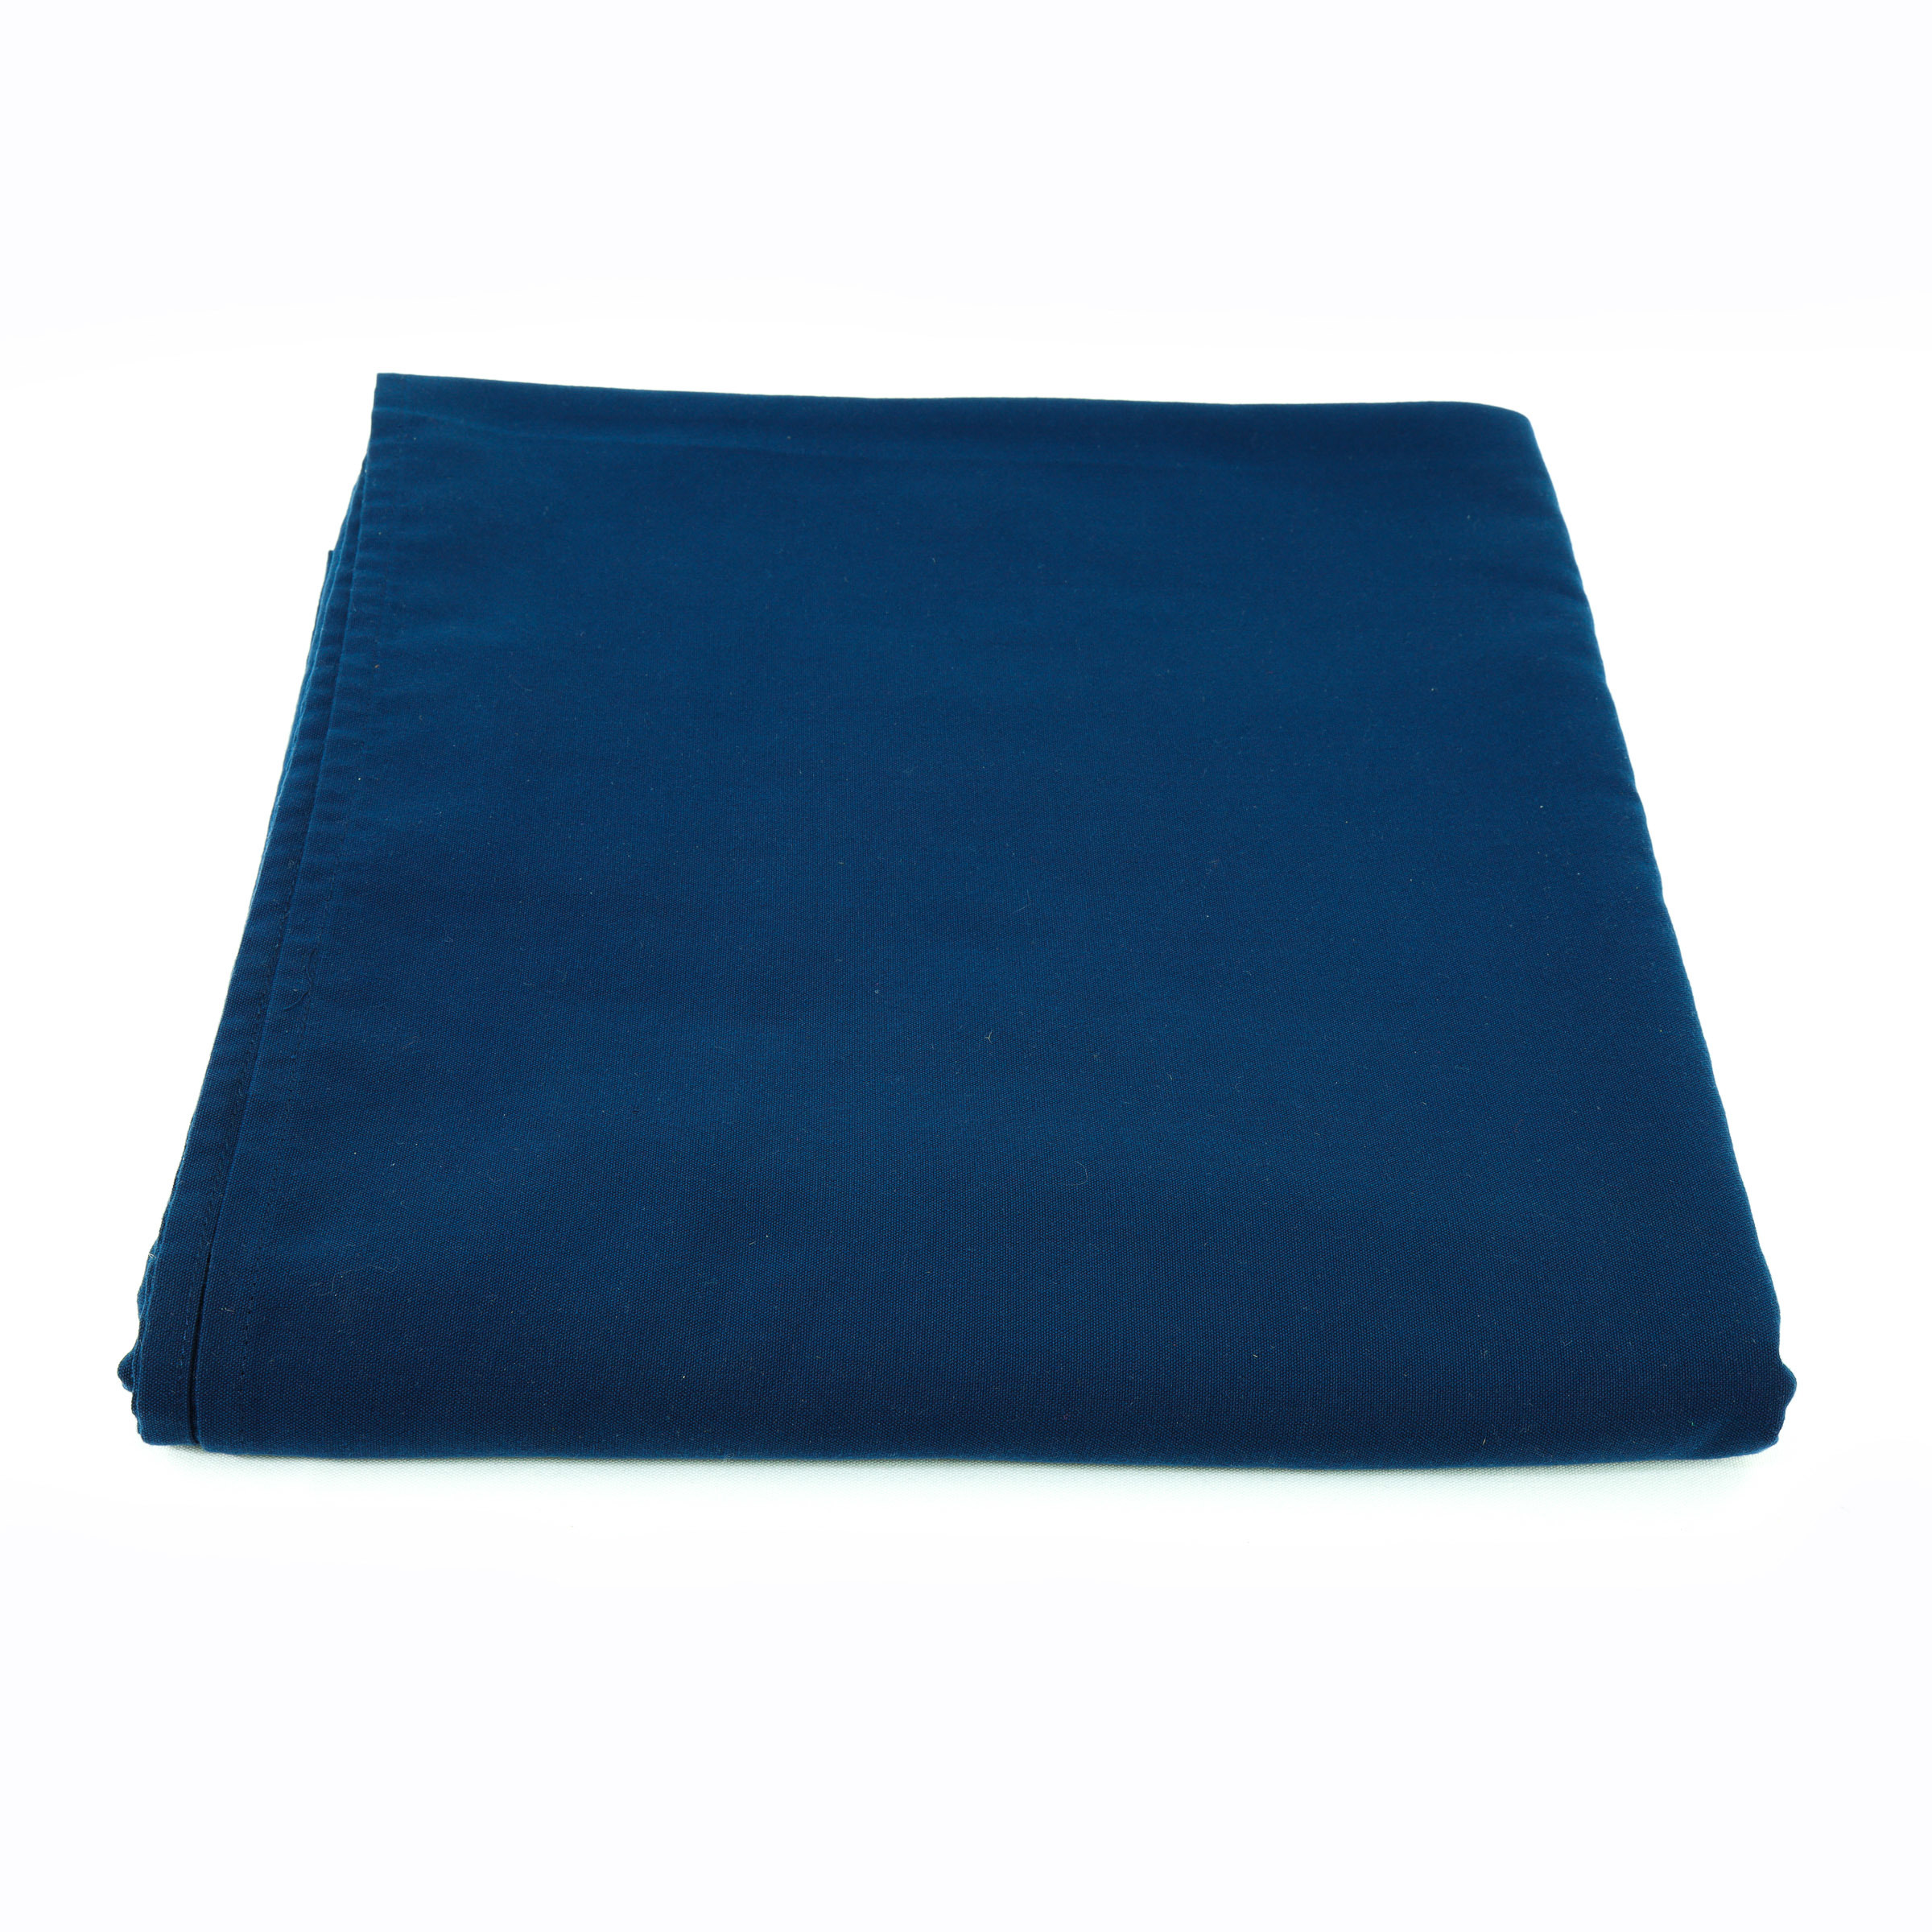 Tablecloth - Trestle - Navy - 3m x 1.4m, Event Linen | Table Covers ...